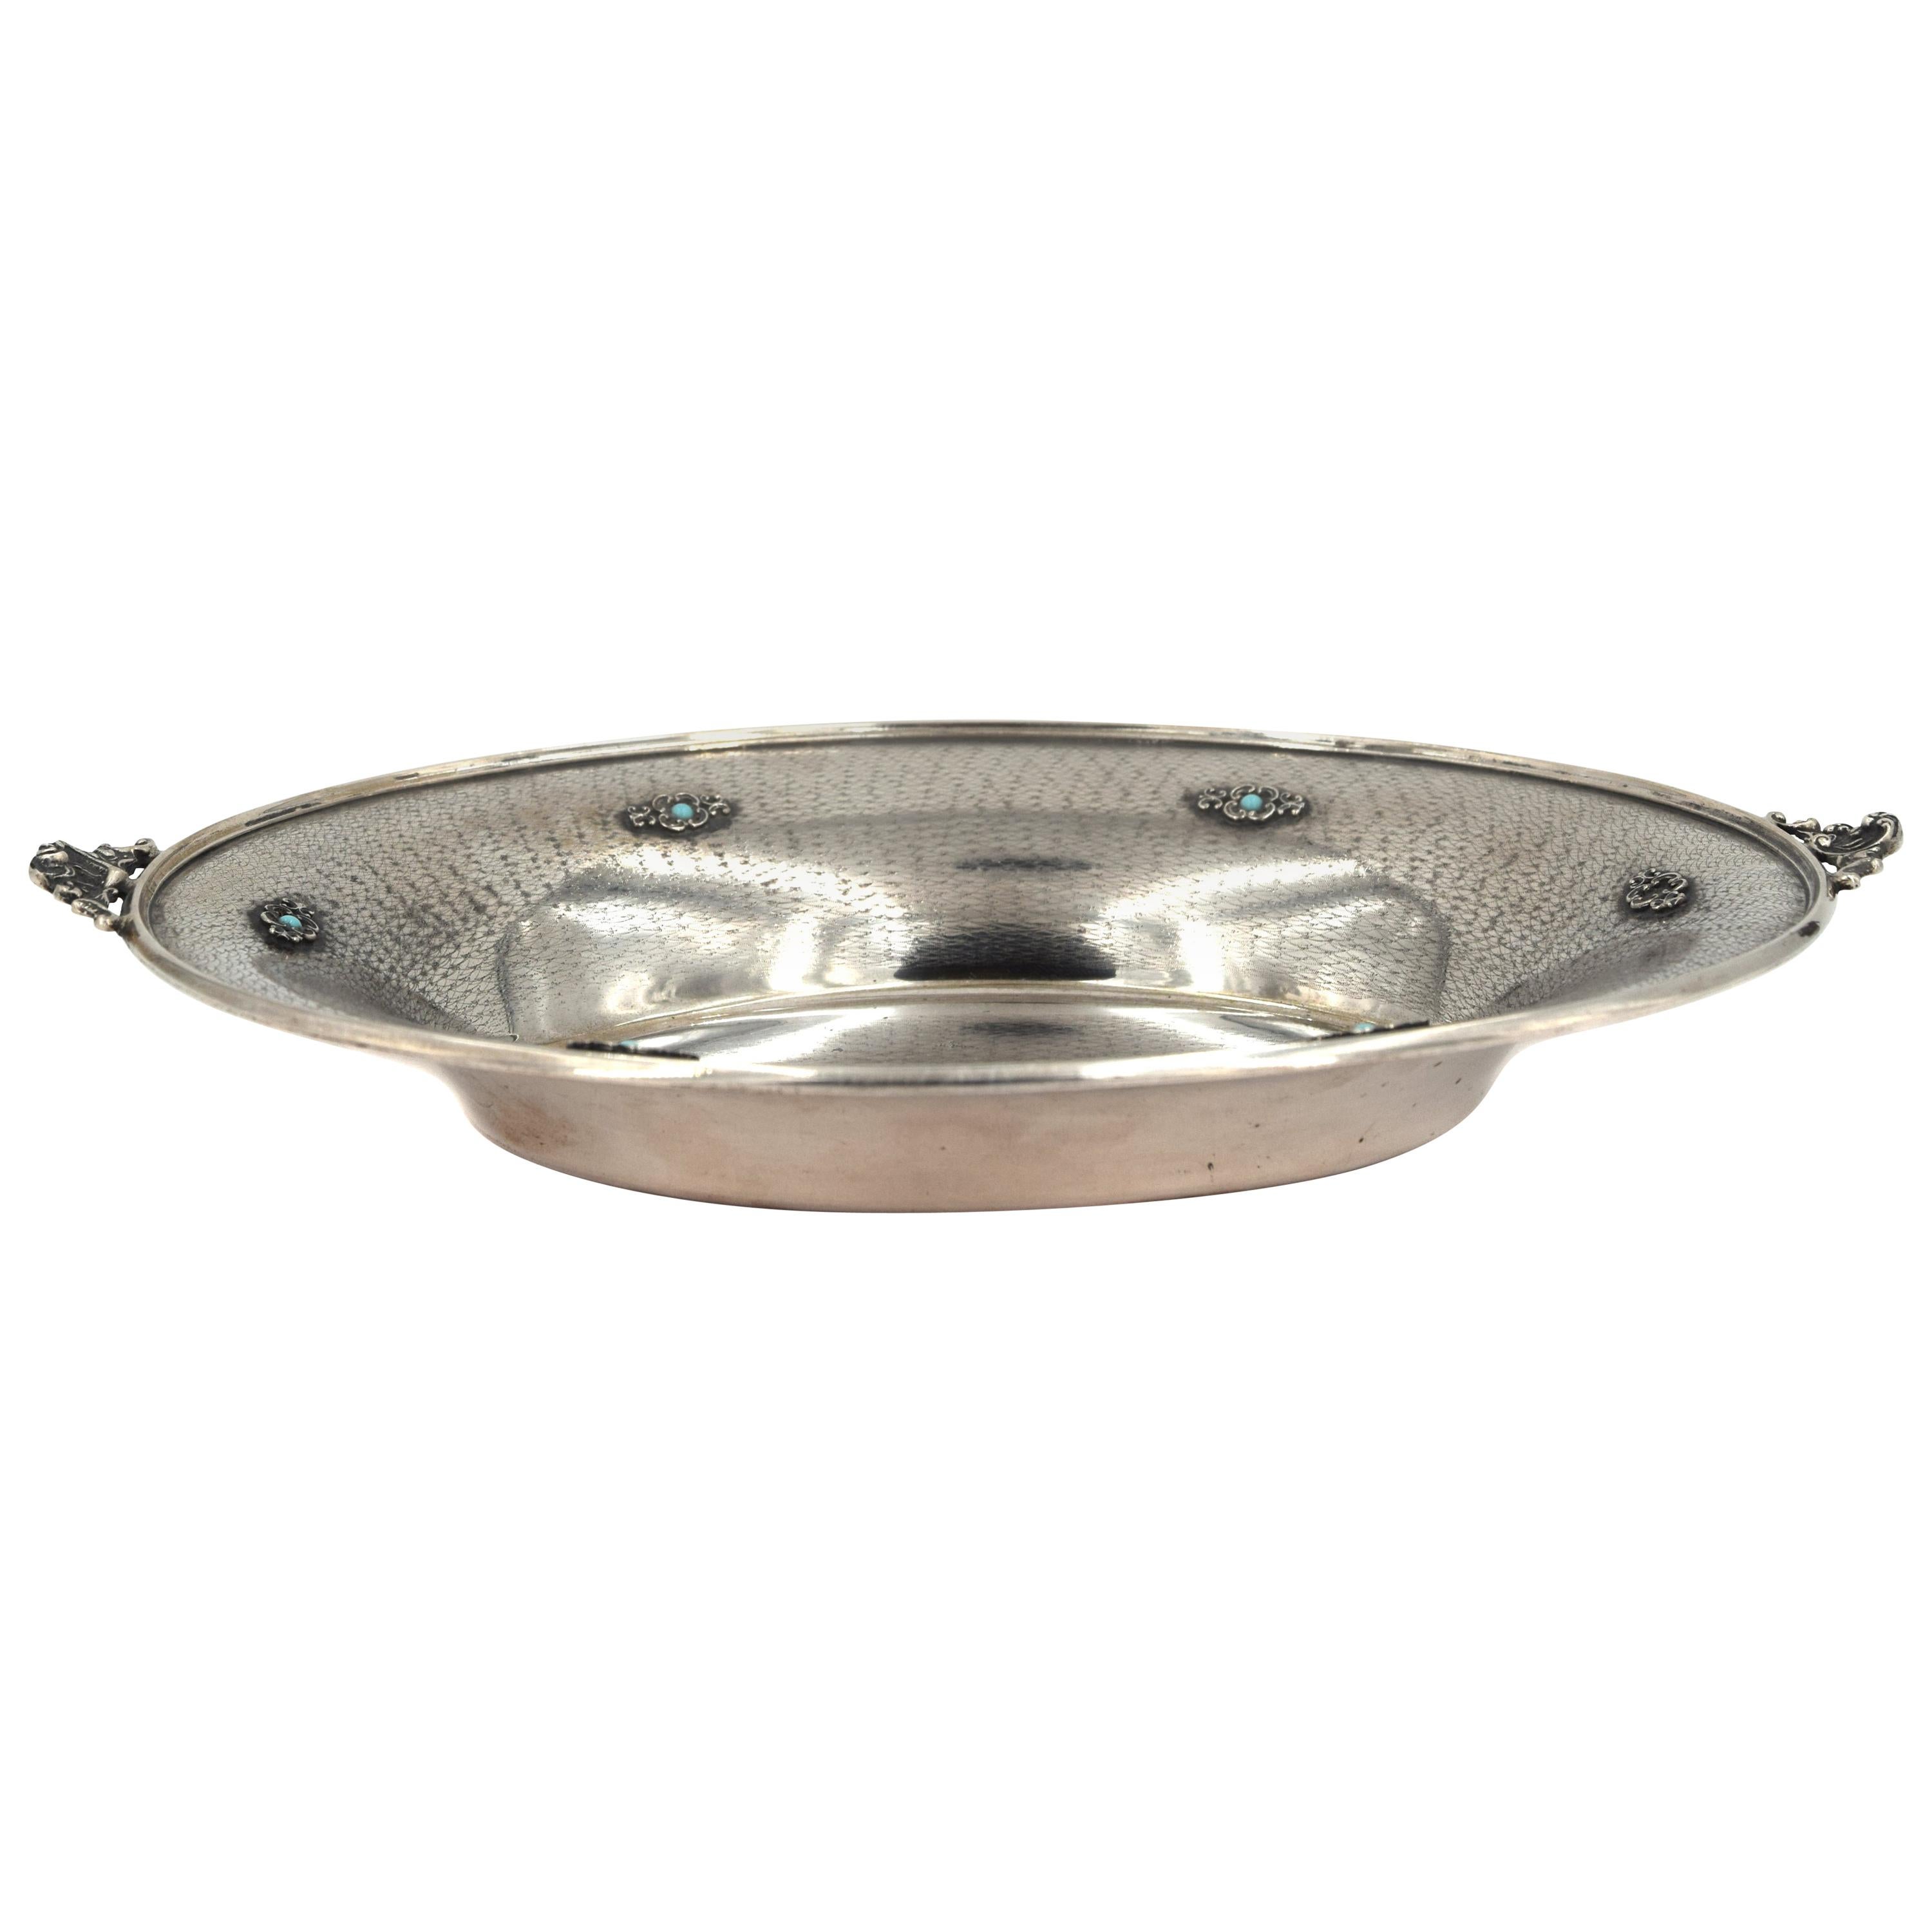 Silver Oval Tray, 19th Century